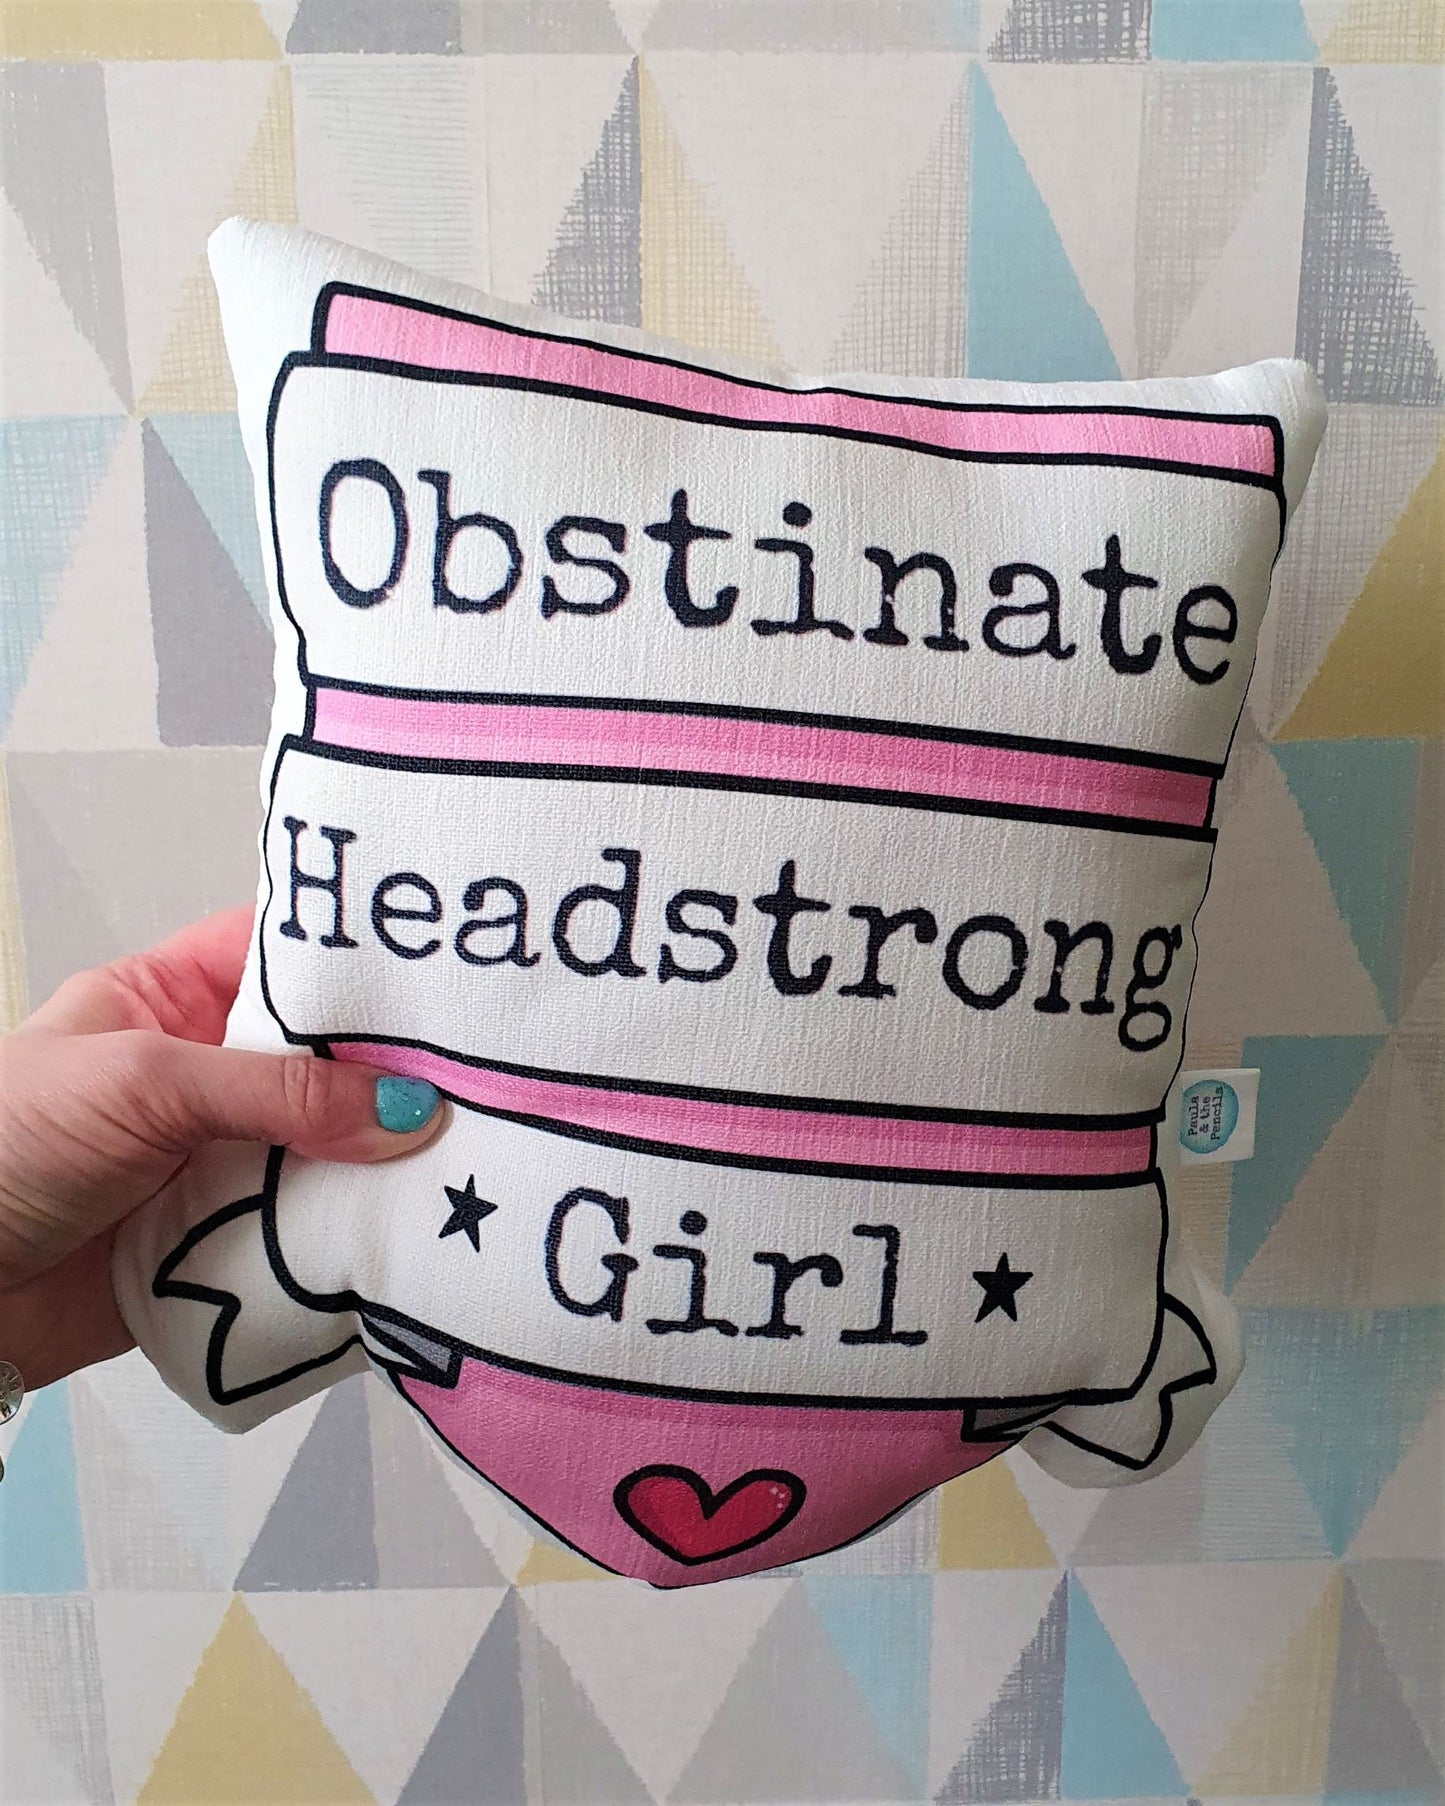 Obstinate Headstrong Girl Cushion